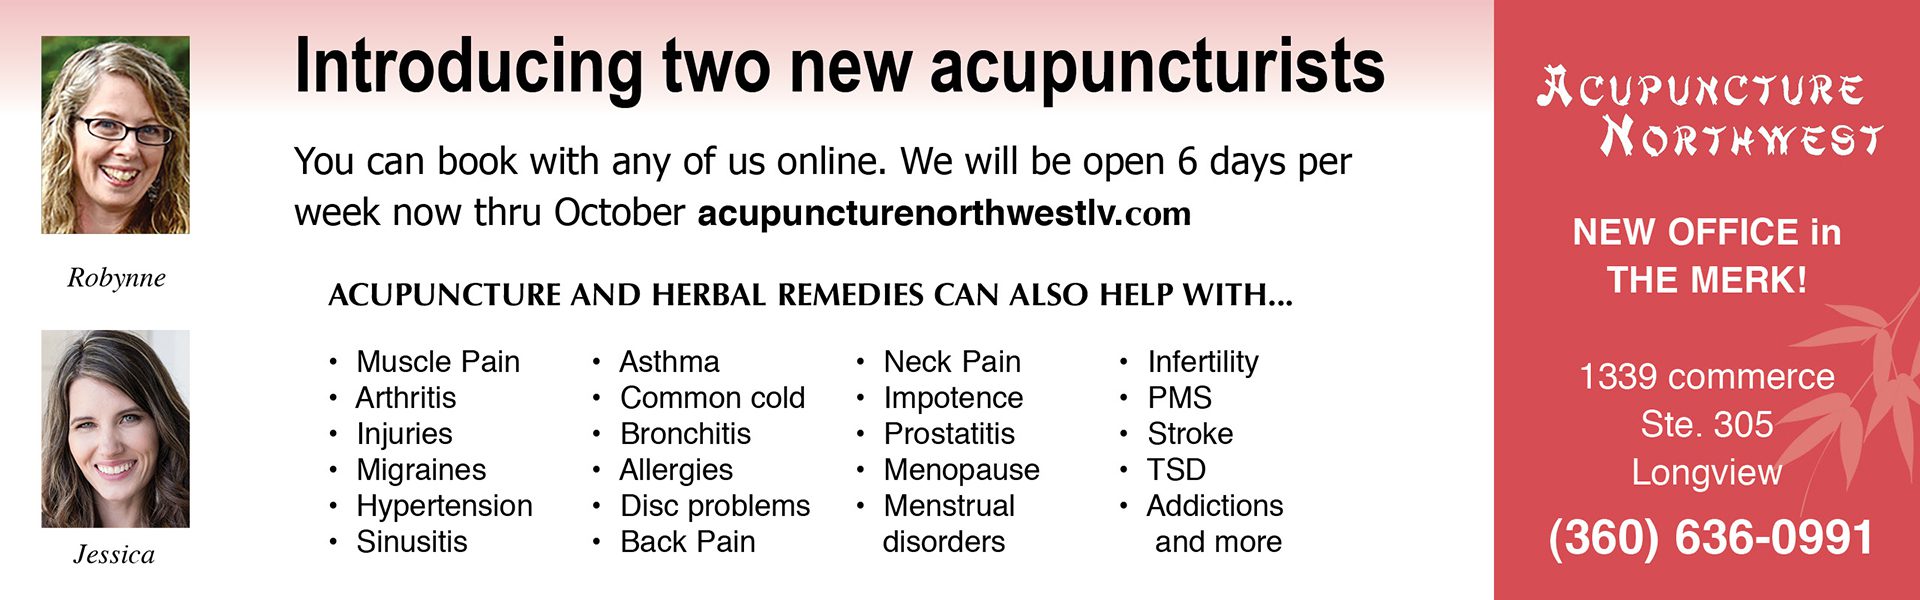 two new acupuncturists